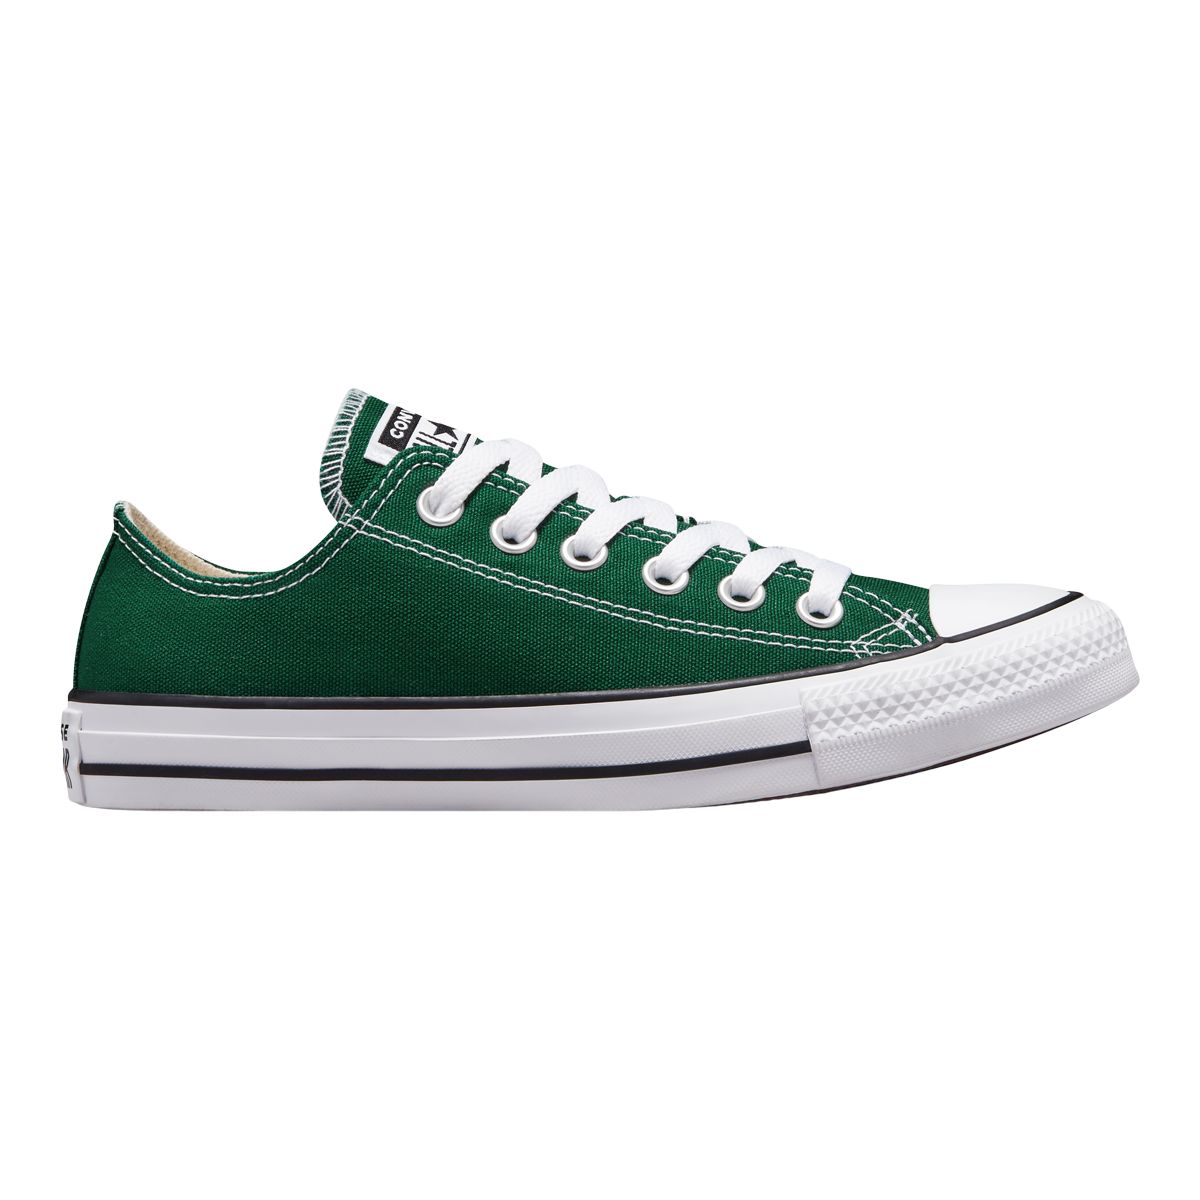 Converse Women's Chuck Taylor All Star Ox Shoes, Sneakers, Canvas ...